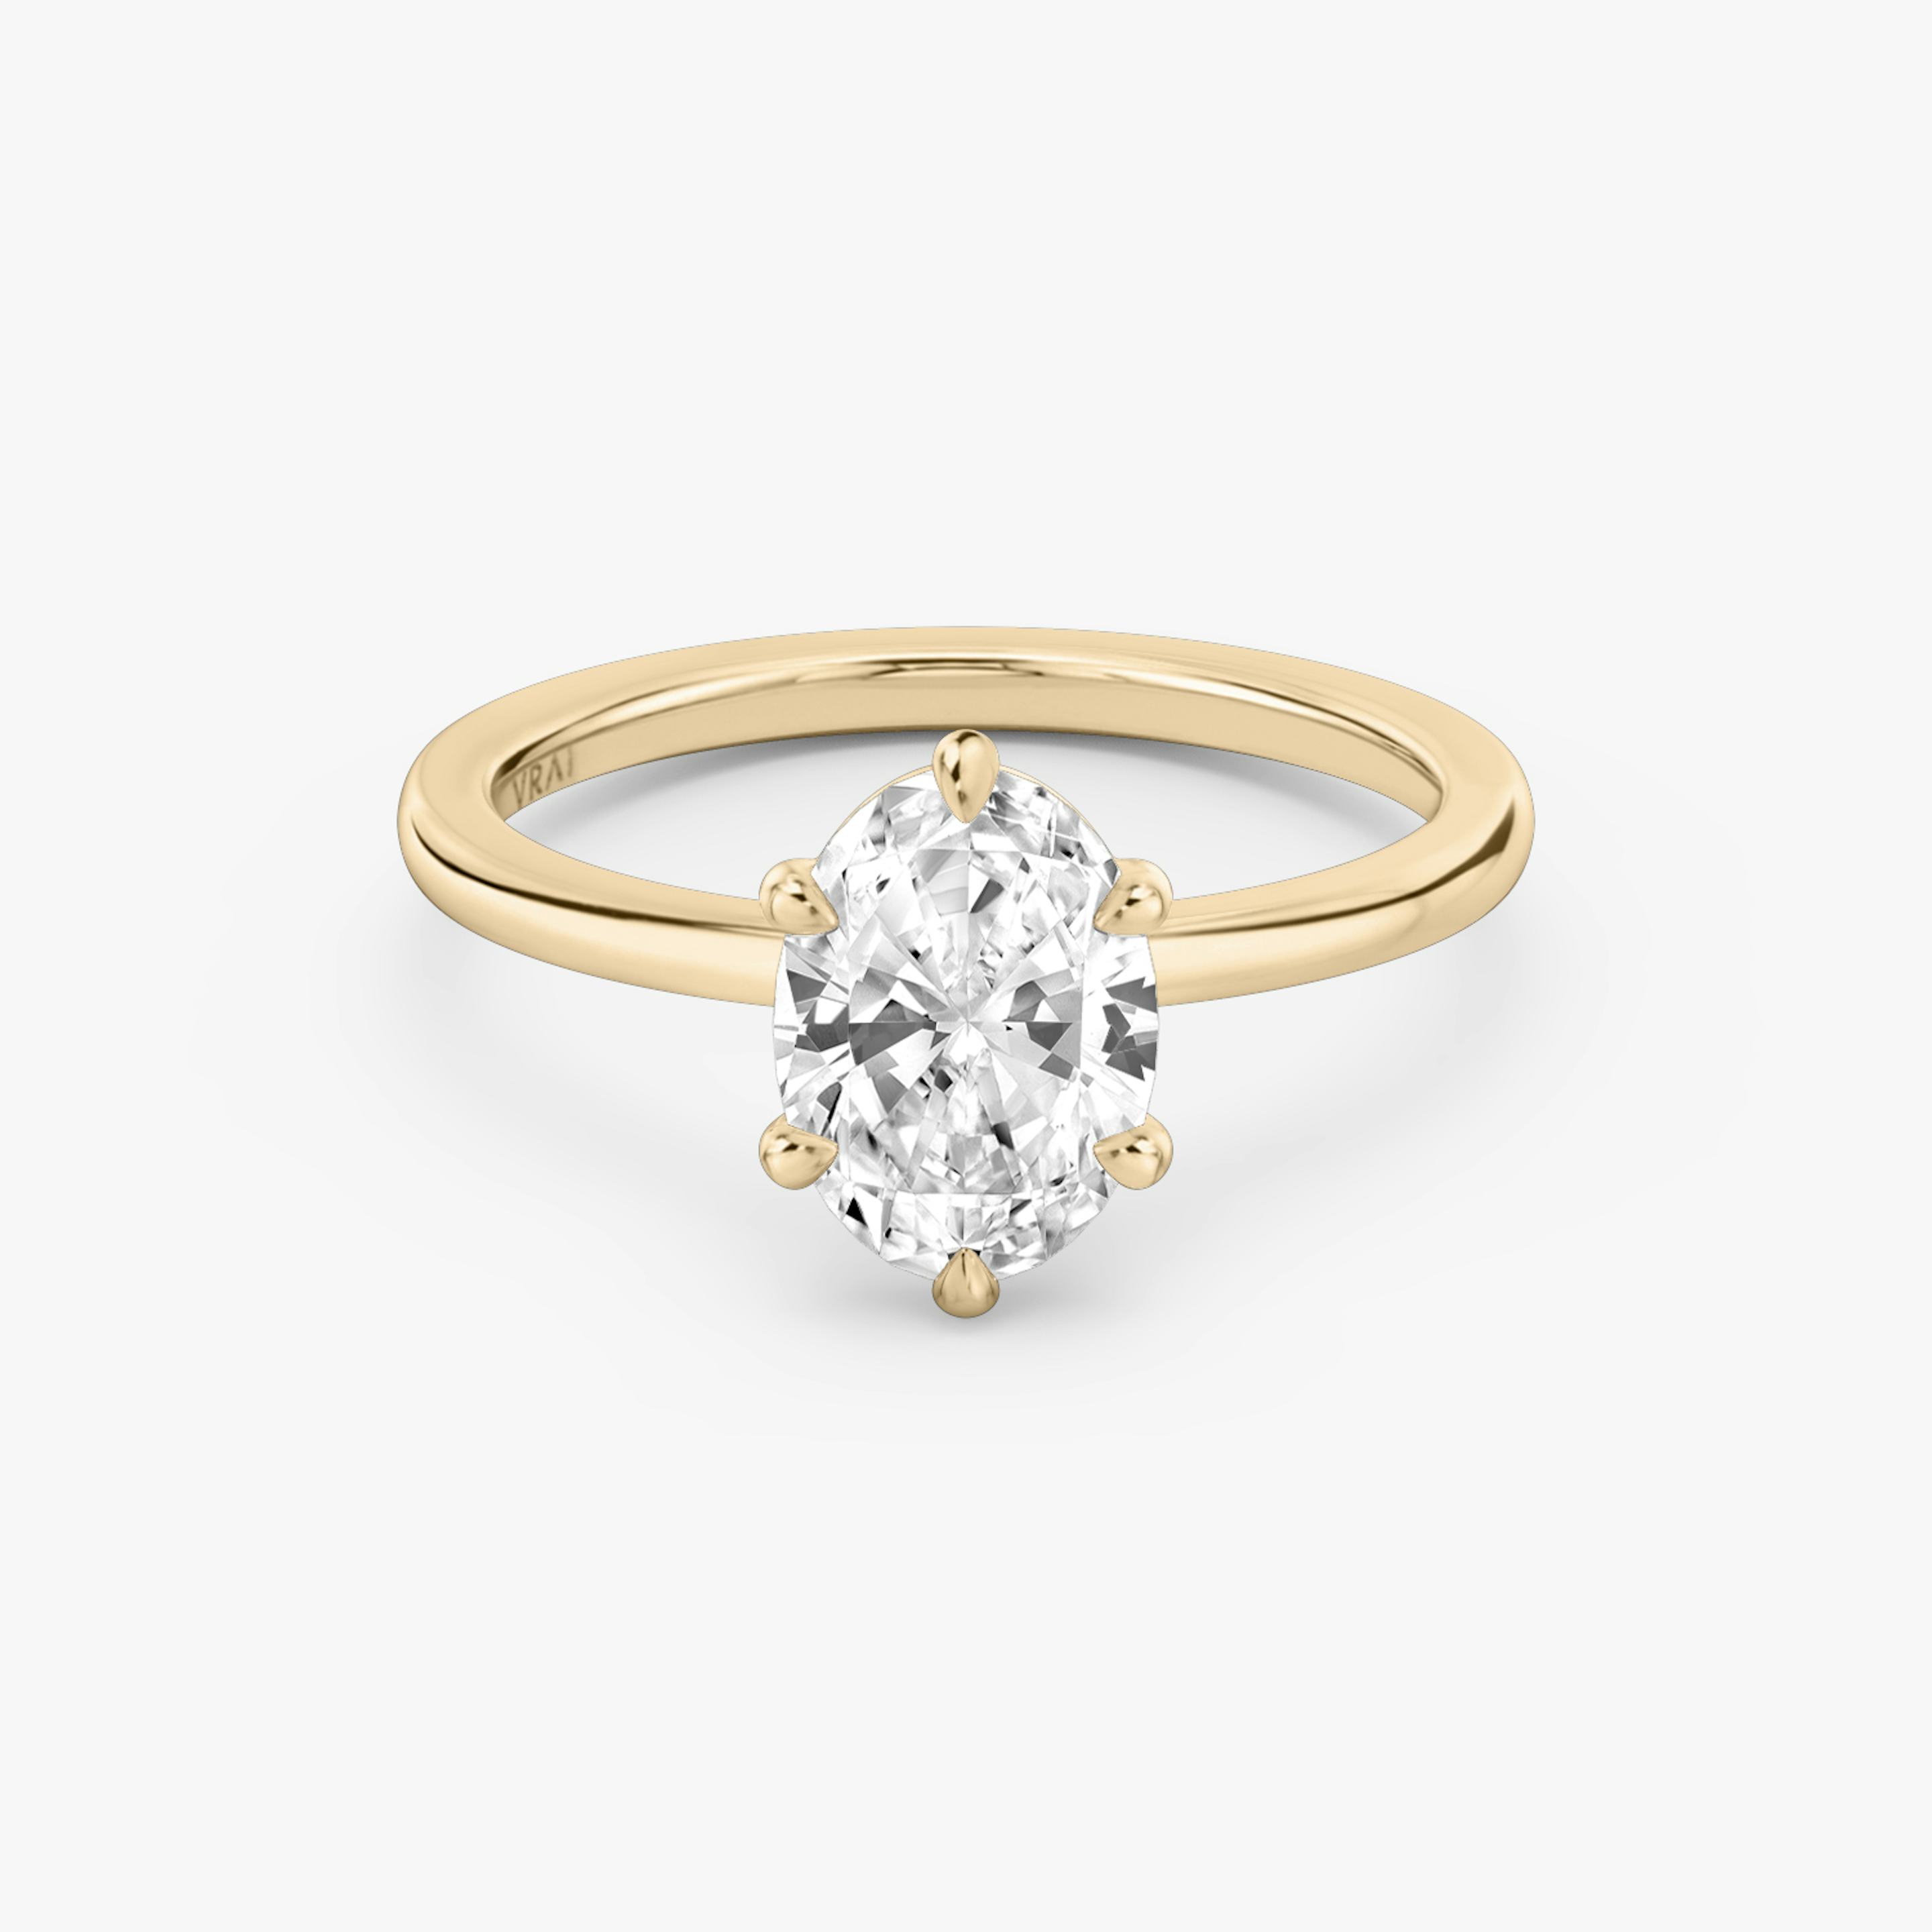 Rose gold 6-prong solitaire with Oval cut diamond